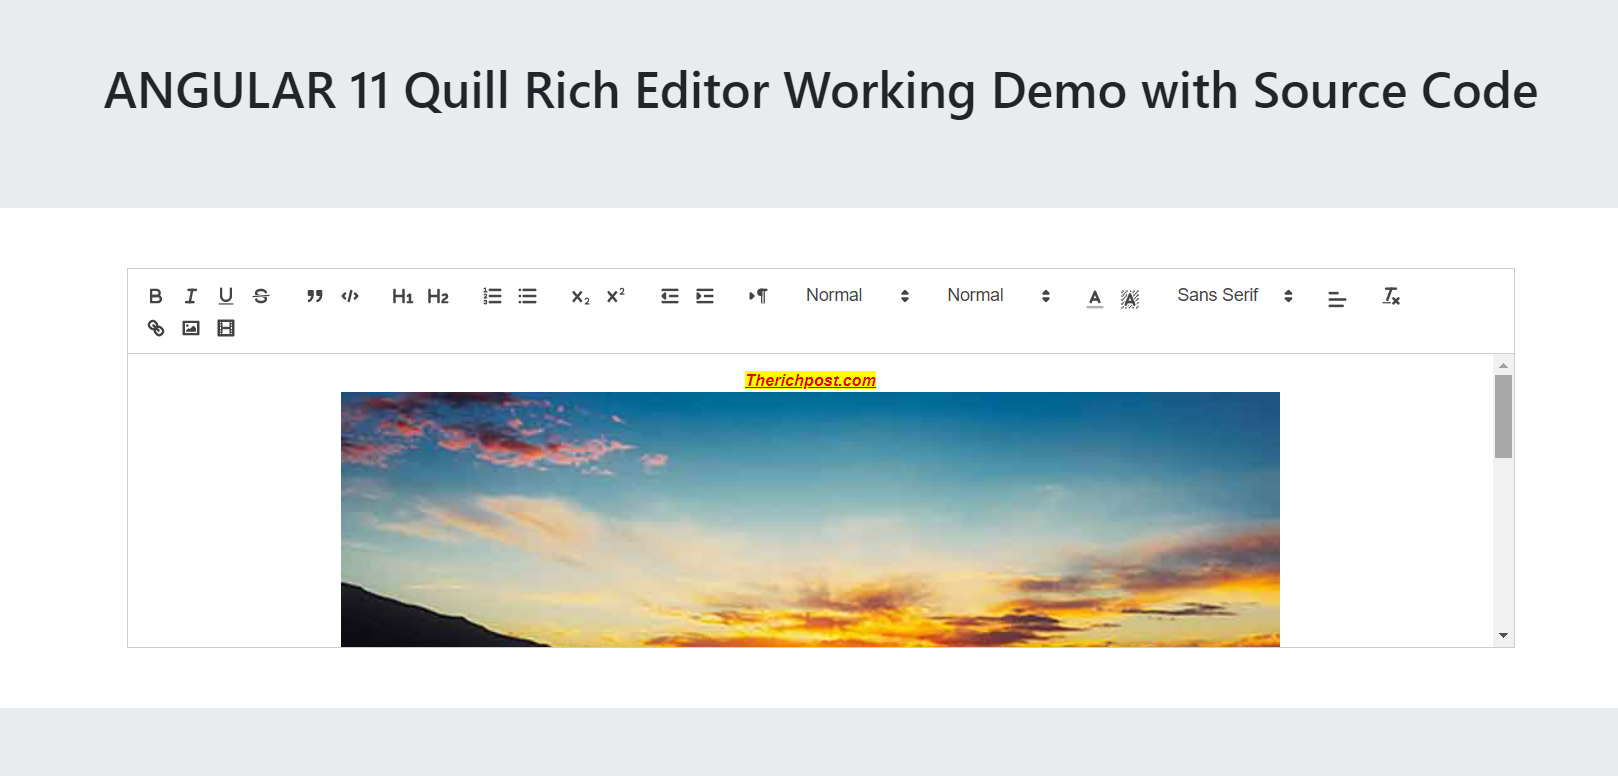 Angular 11 Quill Editor Working Demo with Source Code